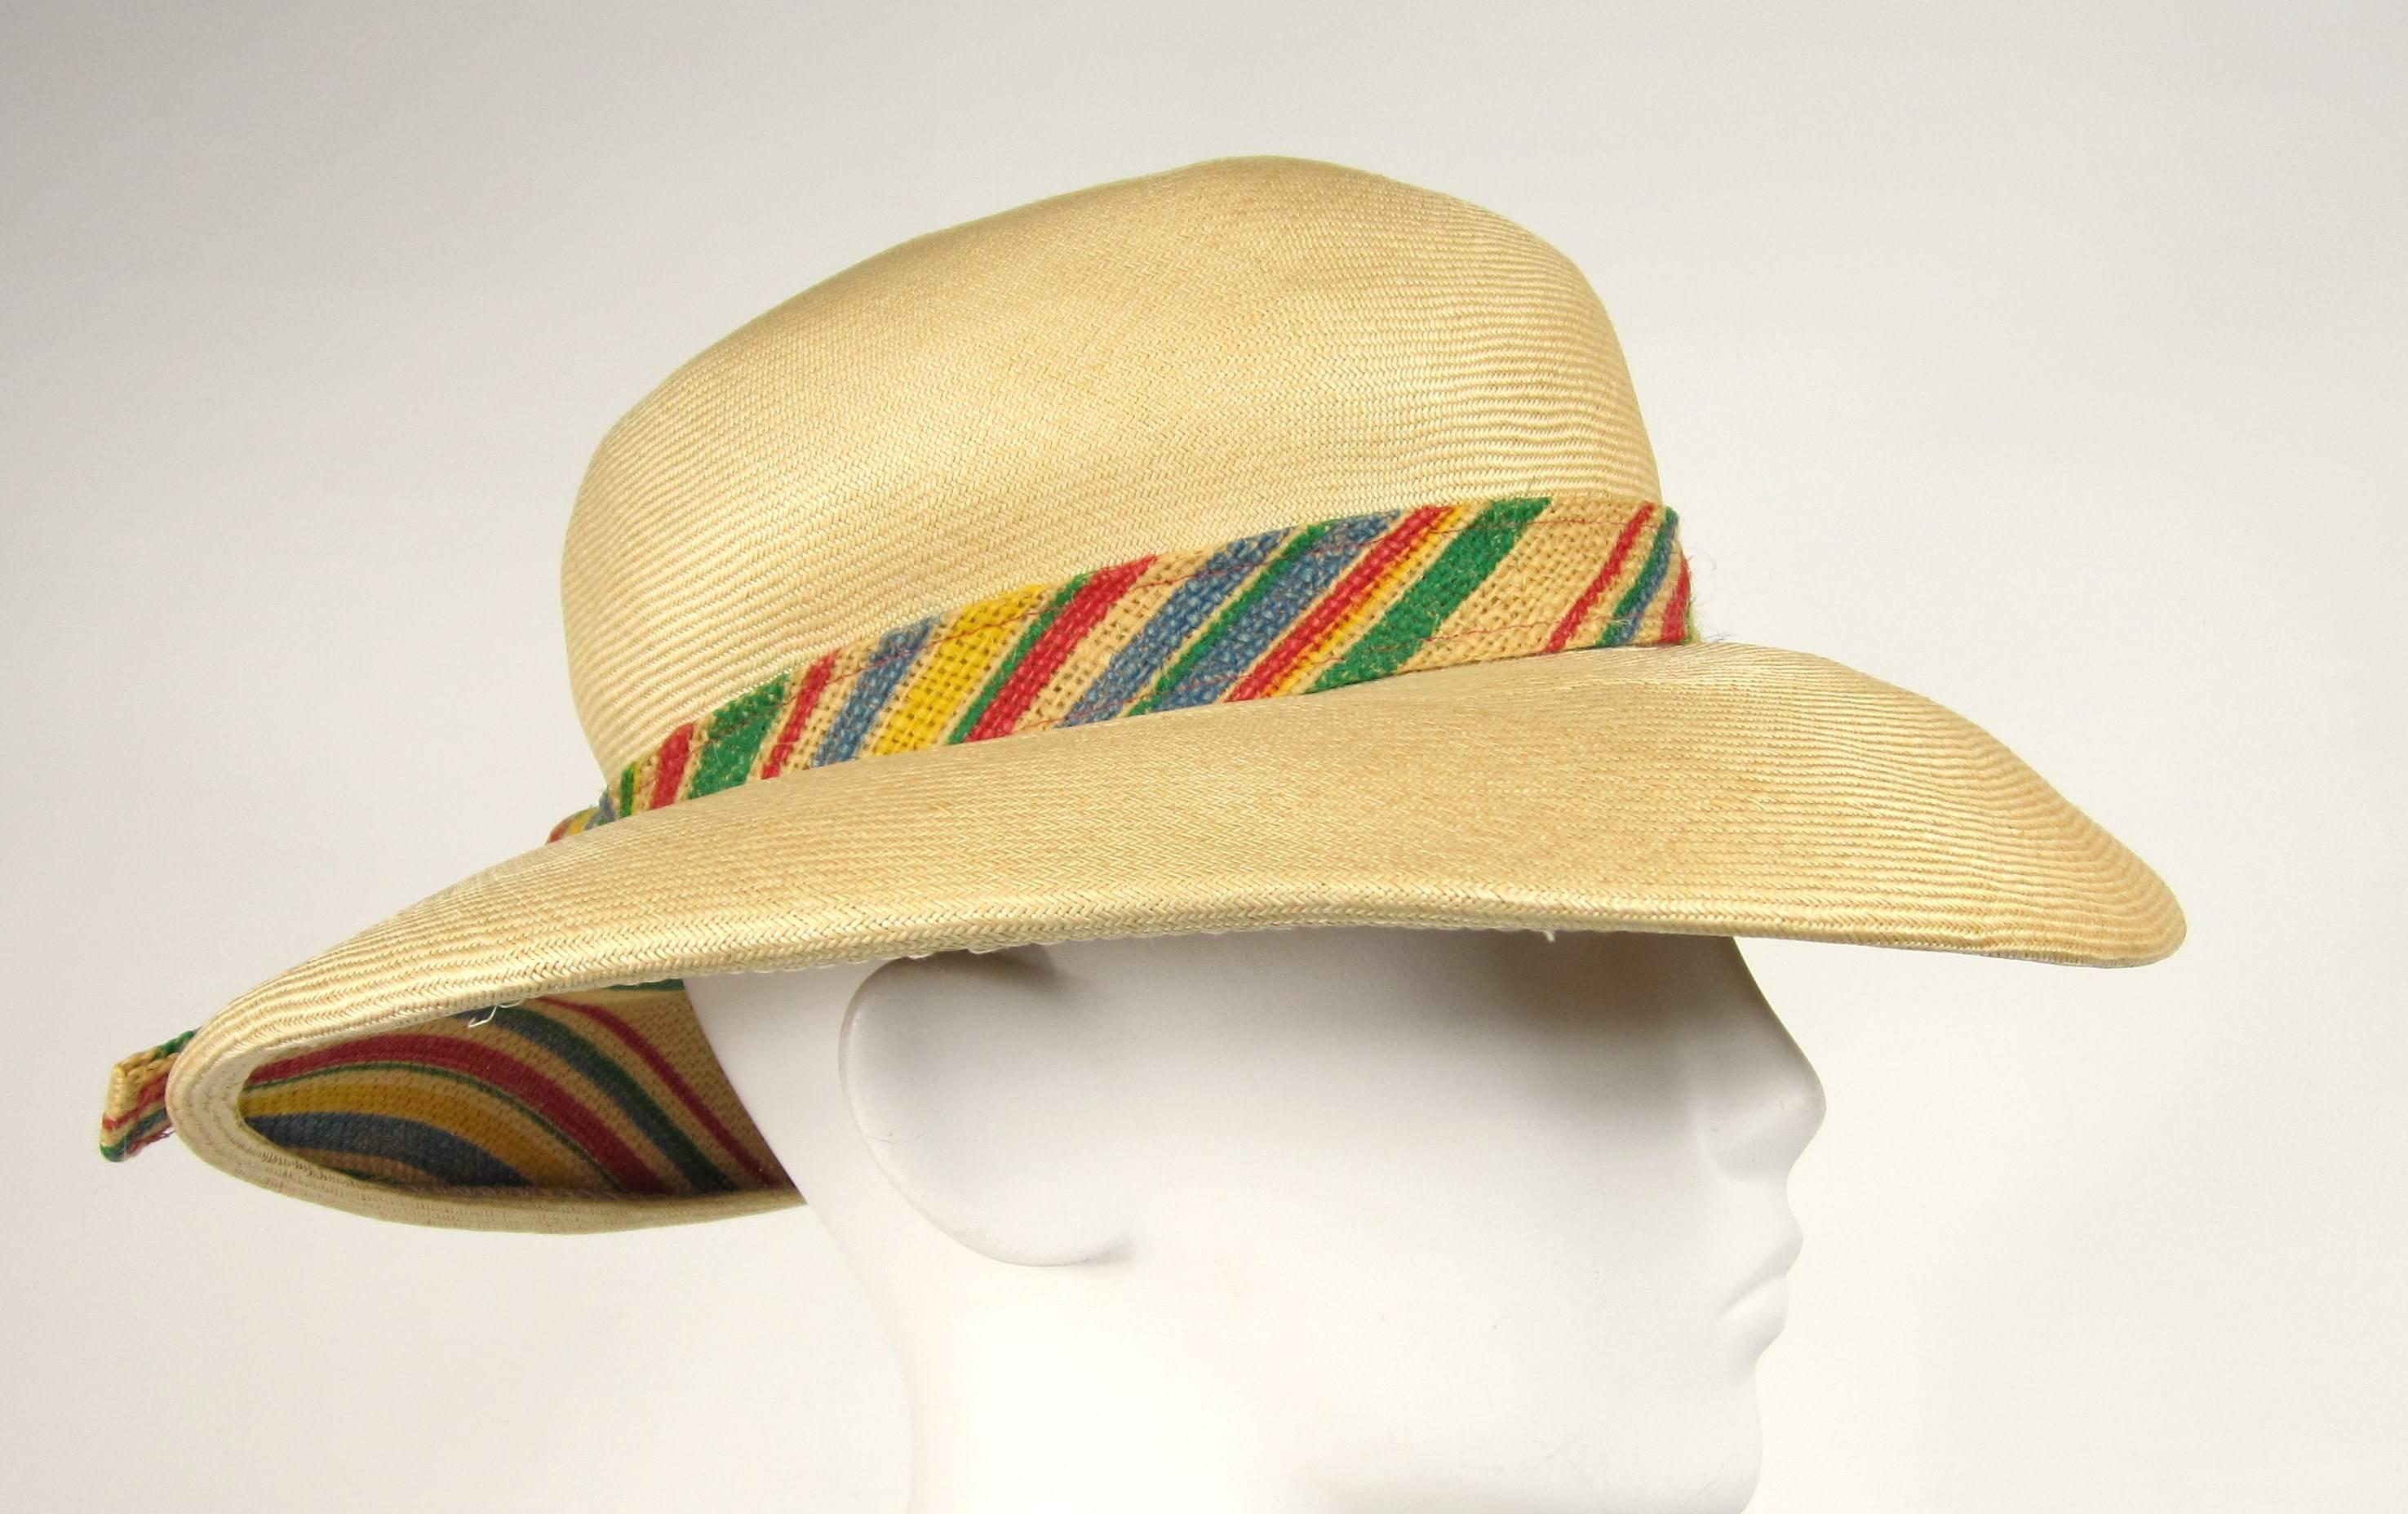 Stunning vintage 1960s Givenchy Hat - Multi Colored Ribbon like detailing surrounding the hat as well as the same coloring on the underside of this treasure. Measuring 22.75 - 4 inch wide Brim - 3.5 inches high. This is out of a massive collection